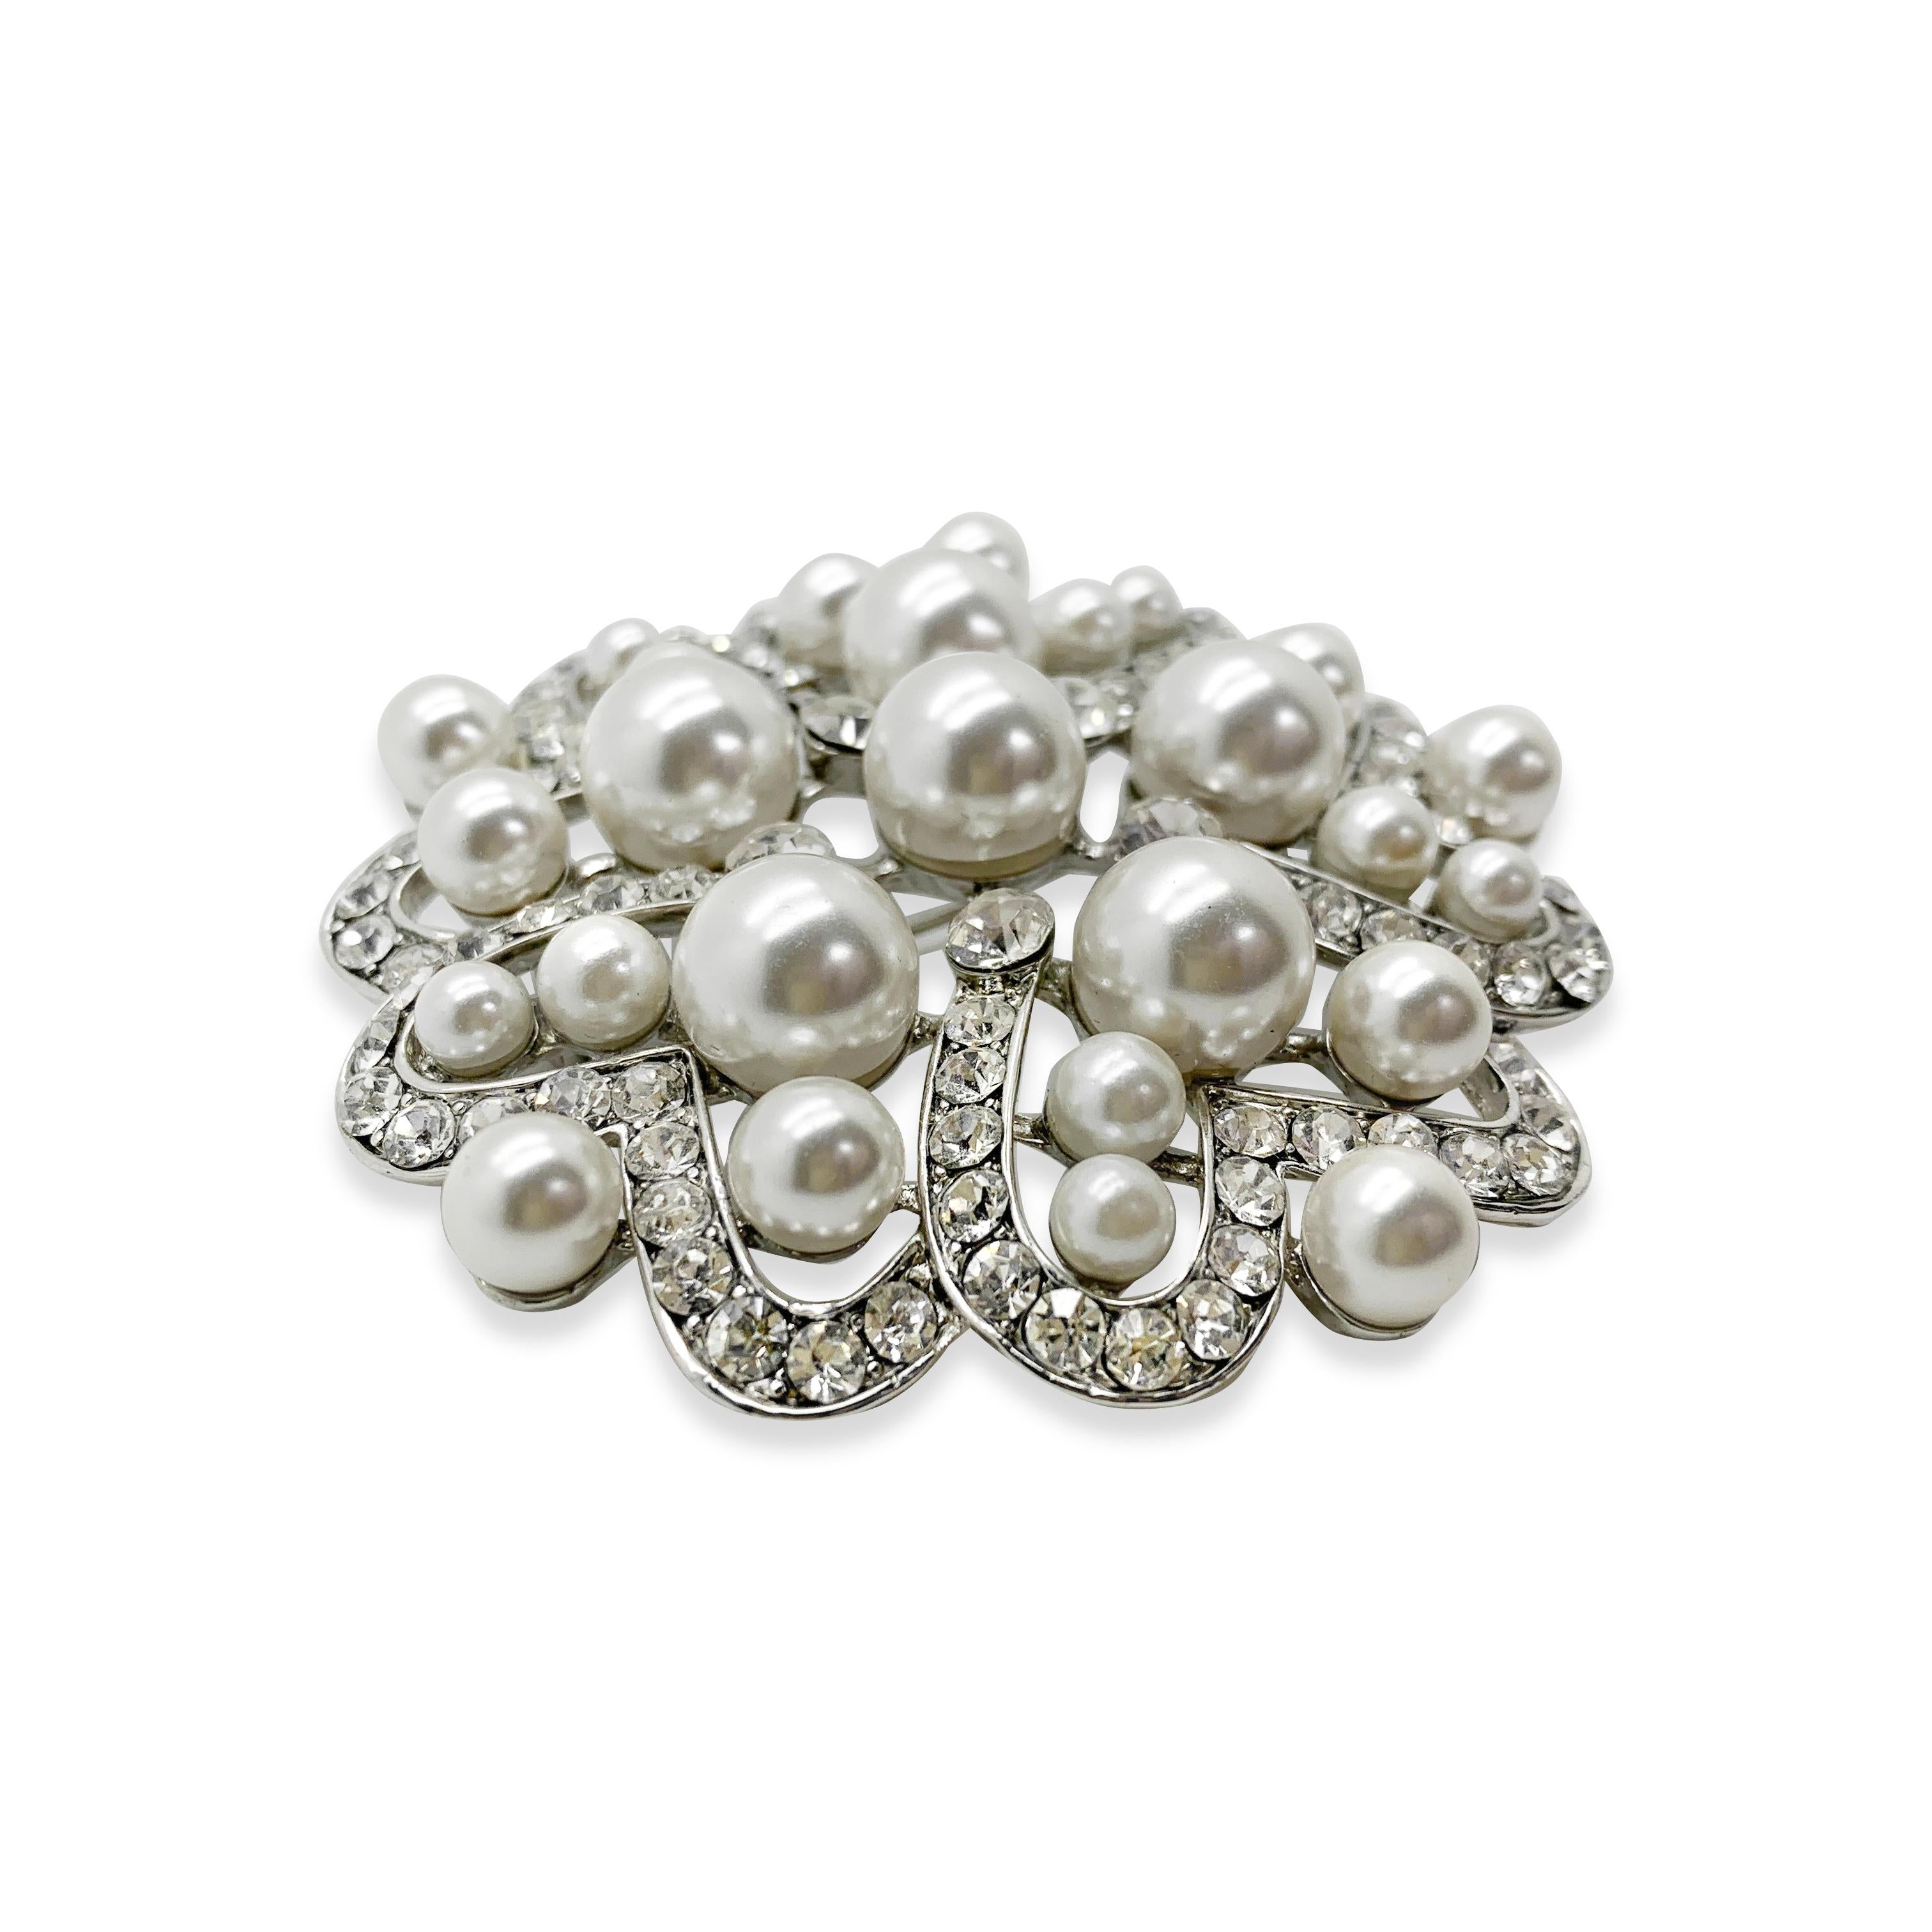 A striking large vintage pearl crystal brooch. Featuring a large roundel with five intersecting heart sections, set with glistening crystals and lustrous whole pearls. A great looking piece for your lapel or collar that will prove eternally